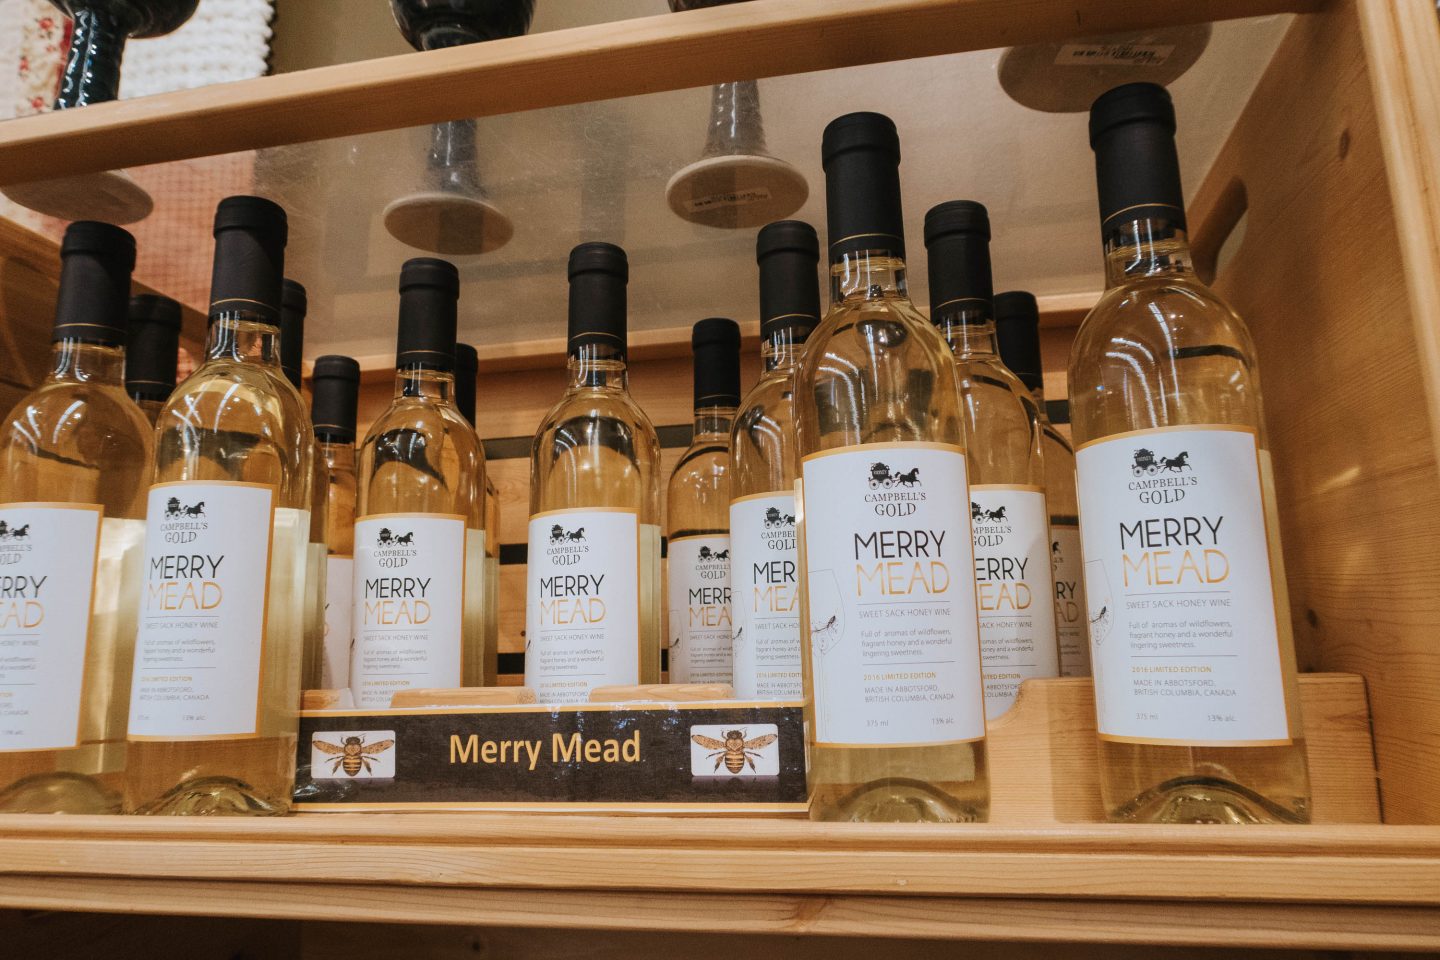 Merry Mead honey wine at Campbell’s Gold and Honey Meadery